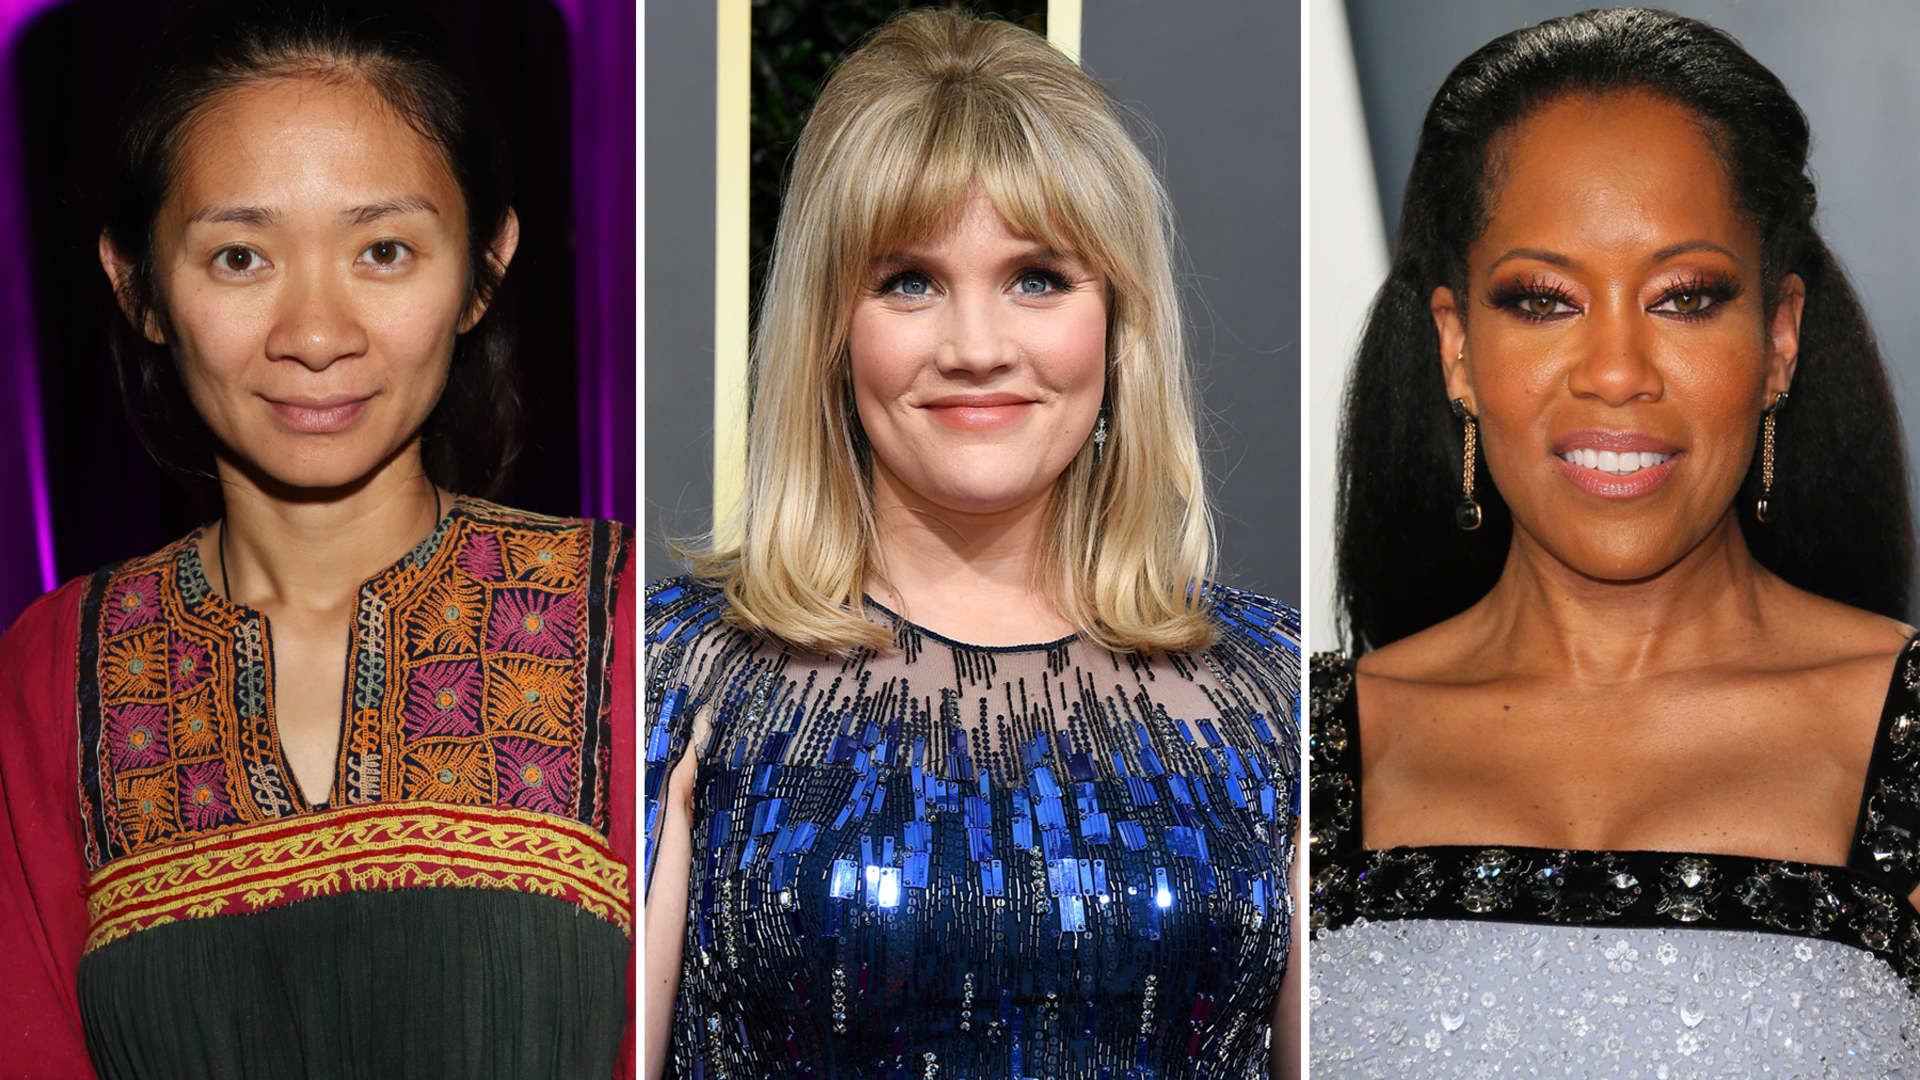 Golden Globe nominees for Best Director: Chloe Zhao (L), Emerald Fennell (C), and Regina King